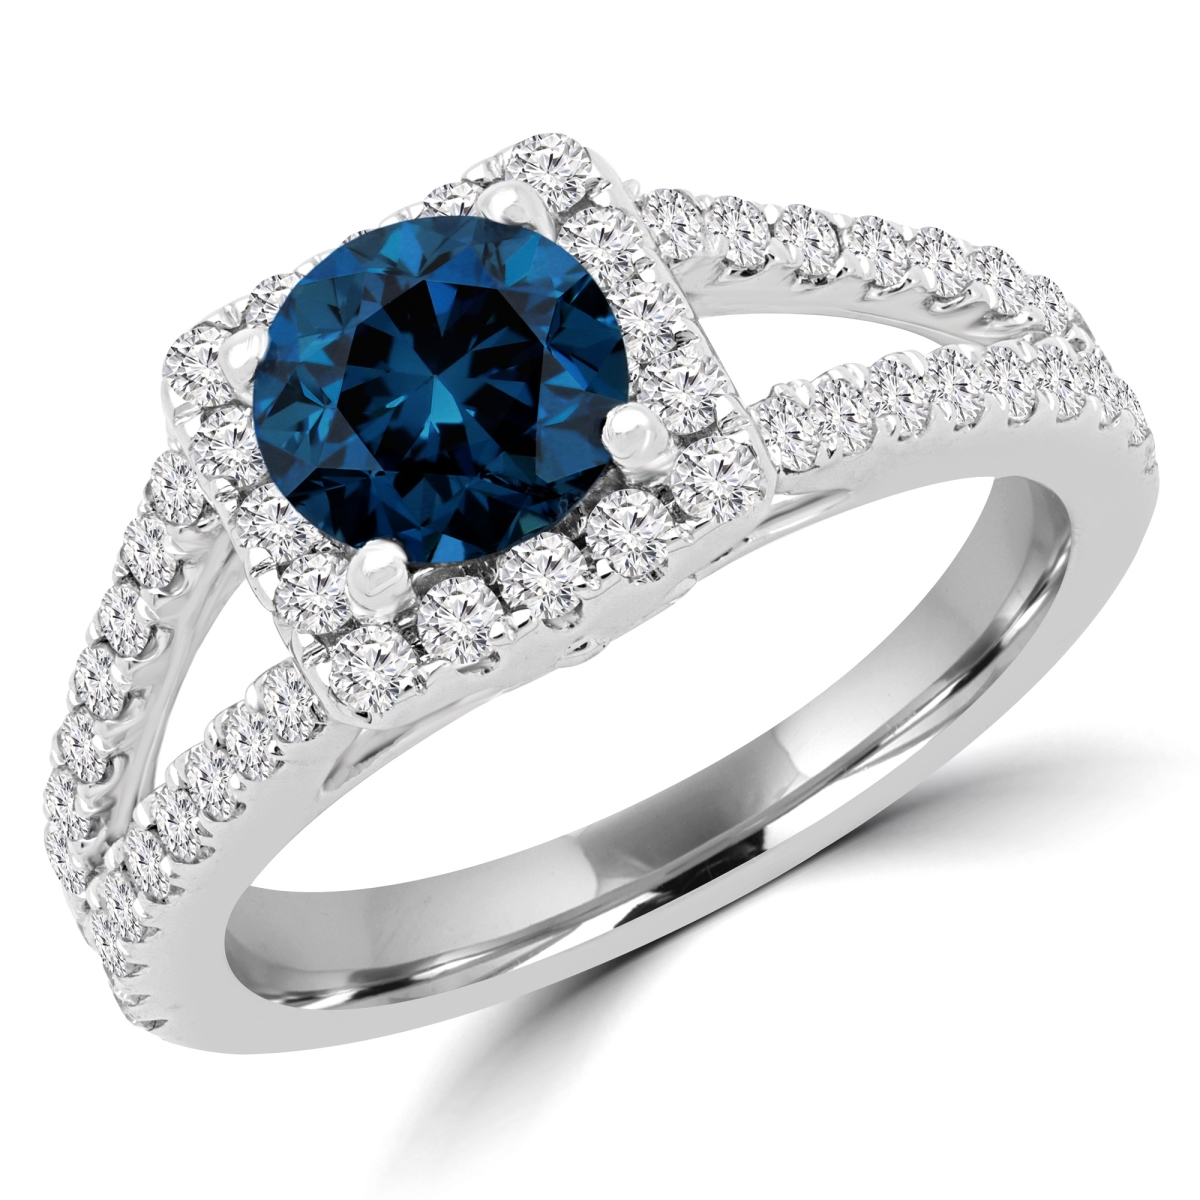 Picture of Majesty Diamonds MD180561-P 1.75 CTW Round Blue Diamond Princess Halo Engagement Ring in 14K White Gold